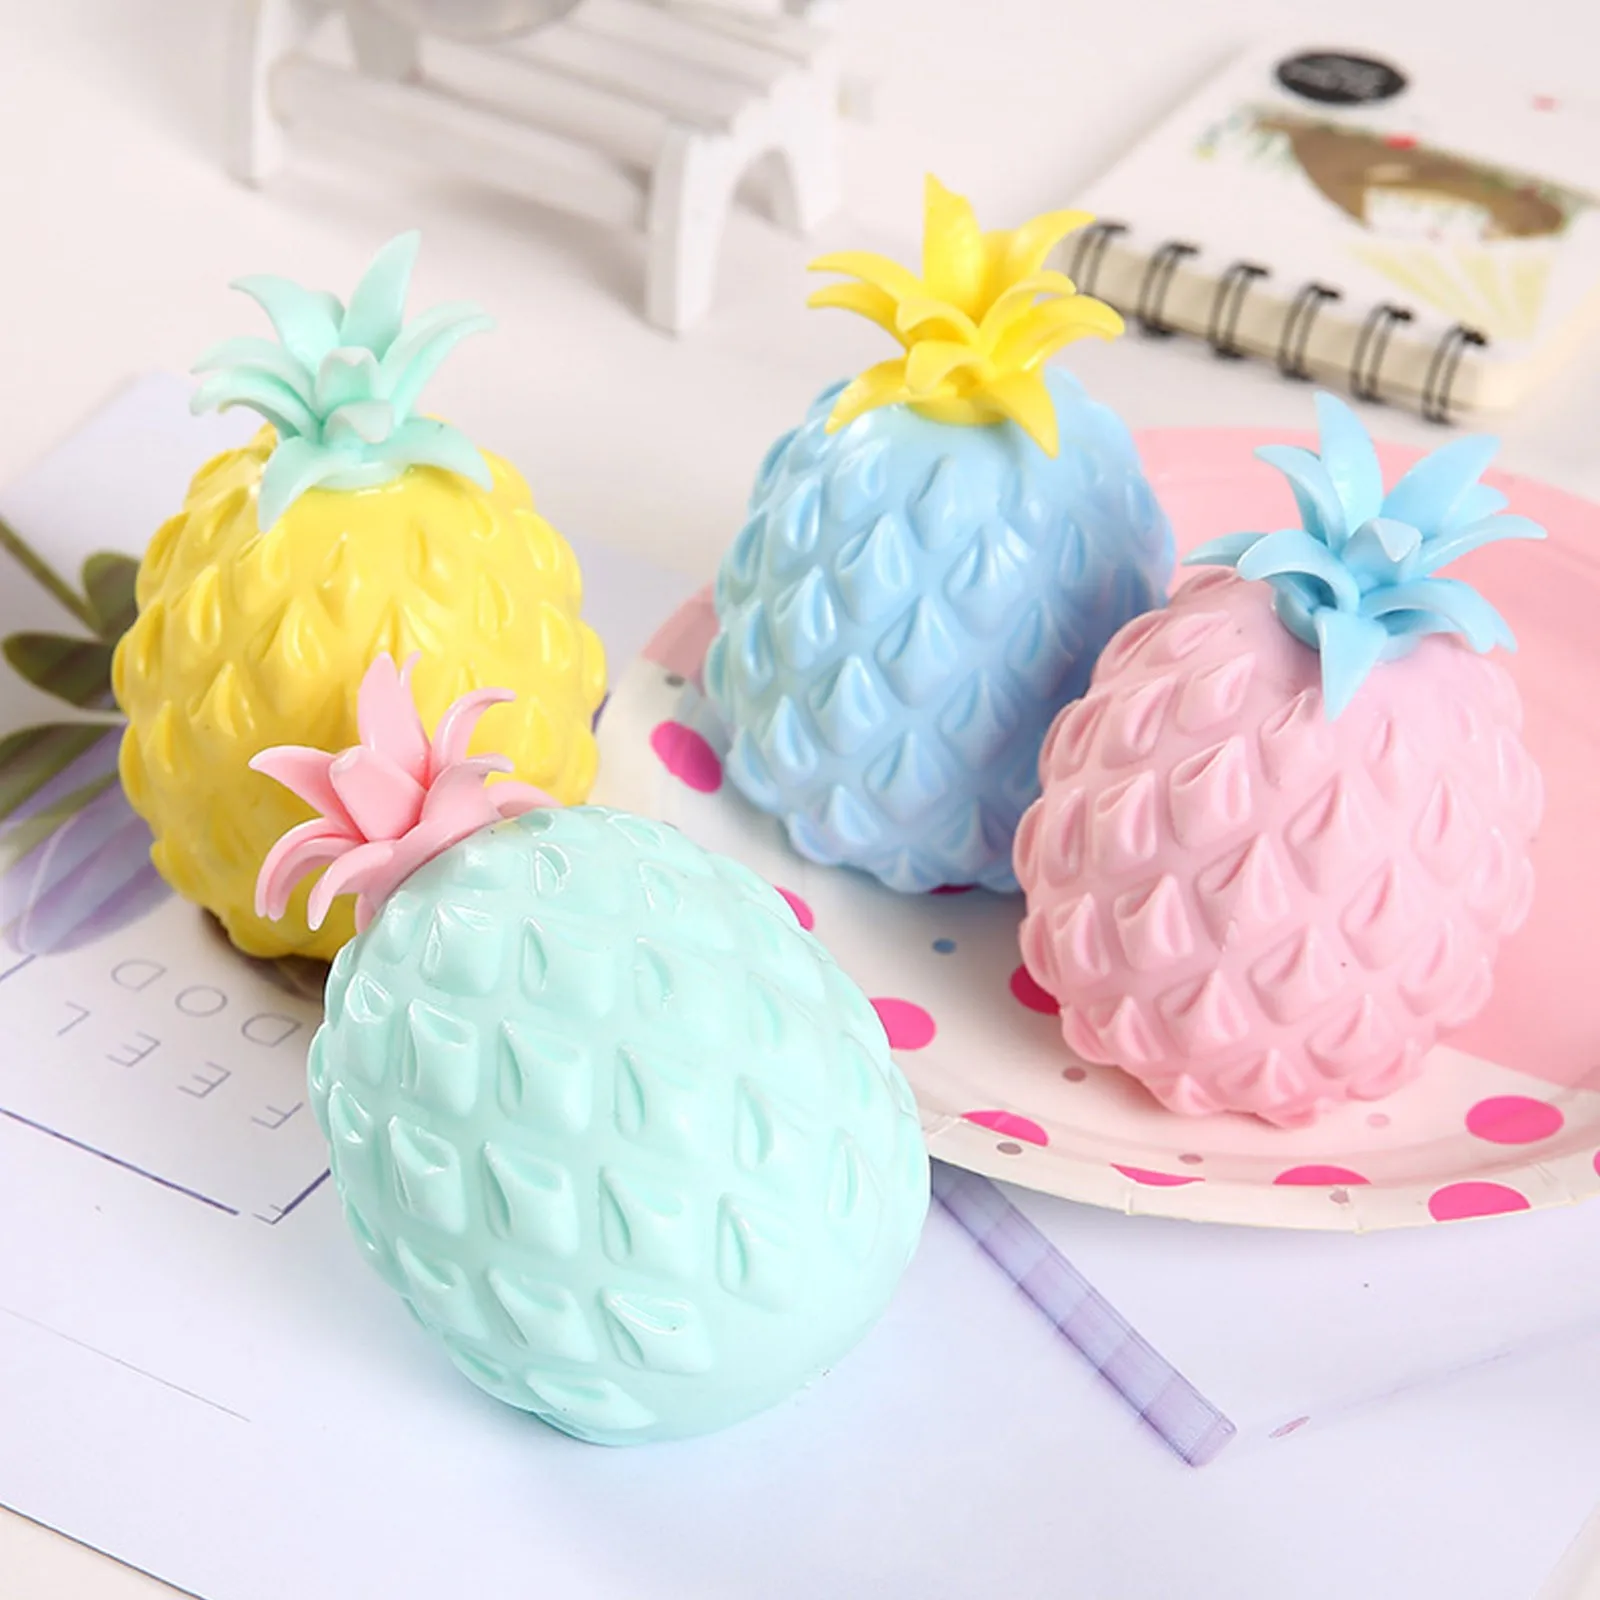 

Games for Children Fidget Toys Novel Simulation Pineapple Decompression Toy Office Pressure Release Toy Antistress for Hands